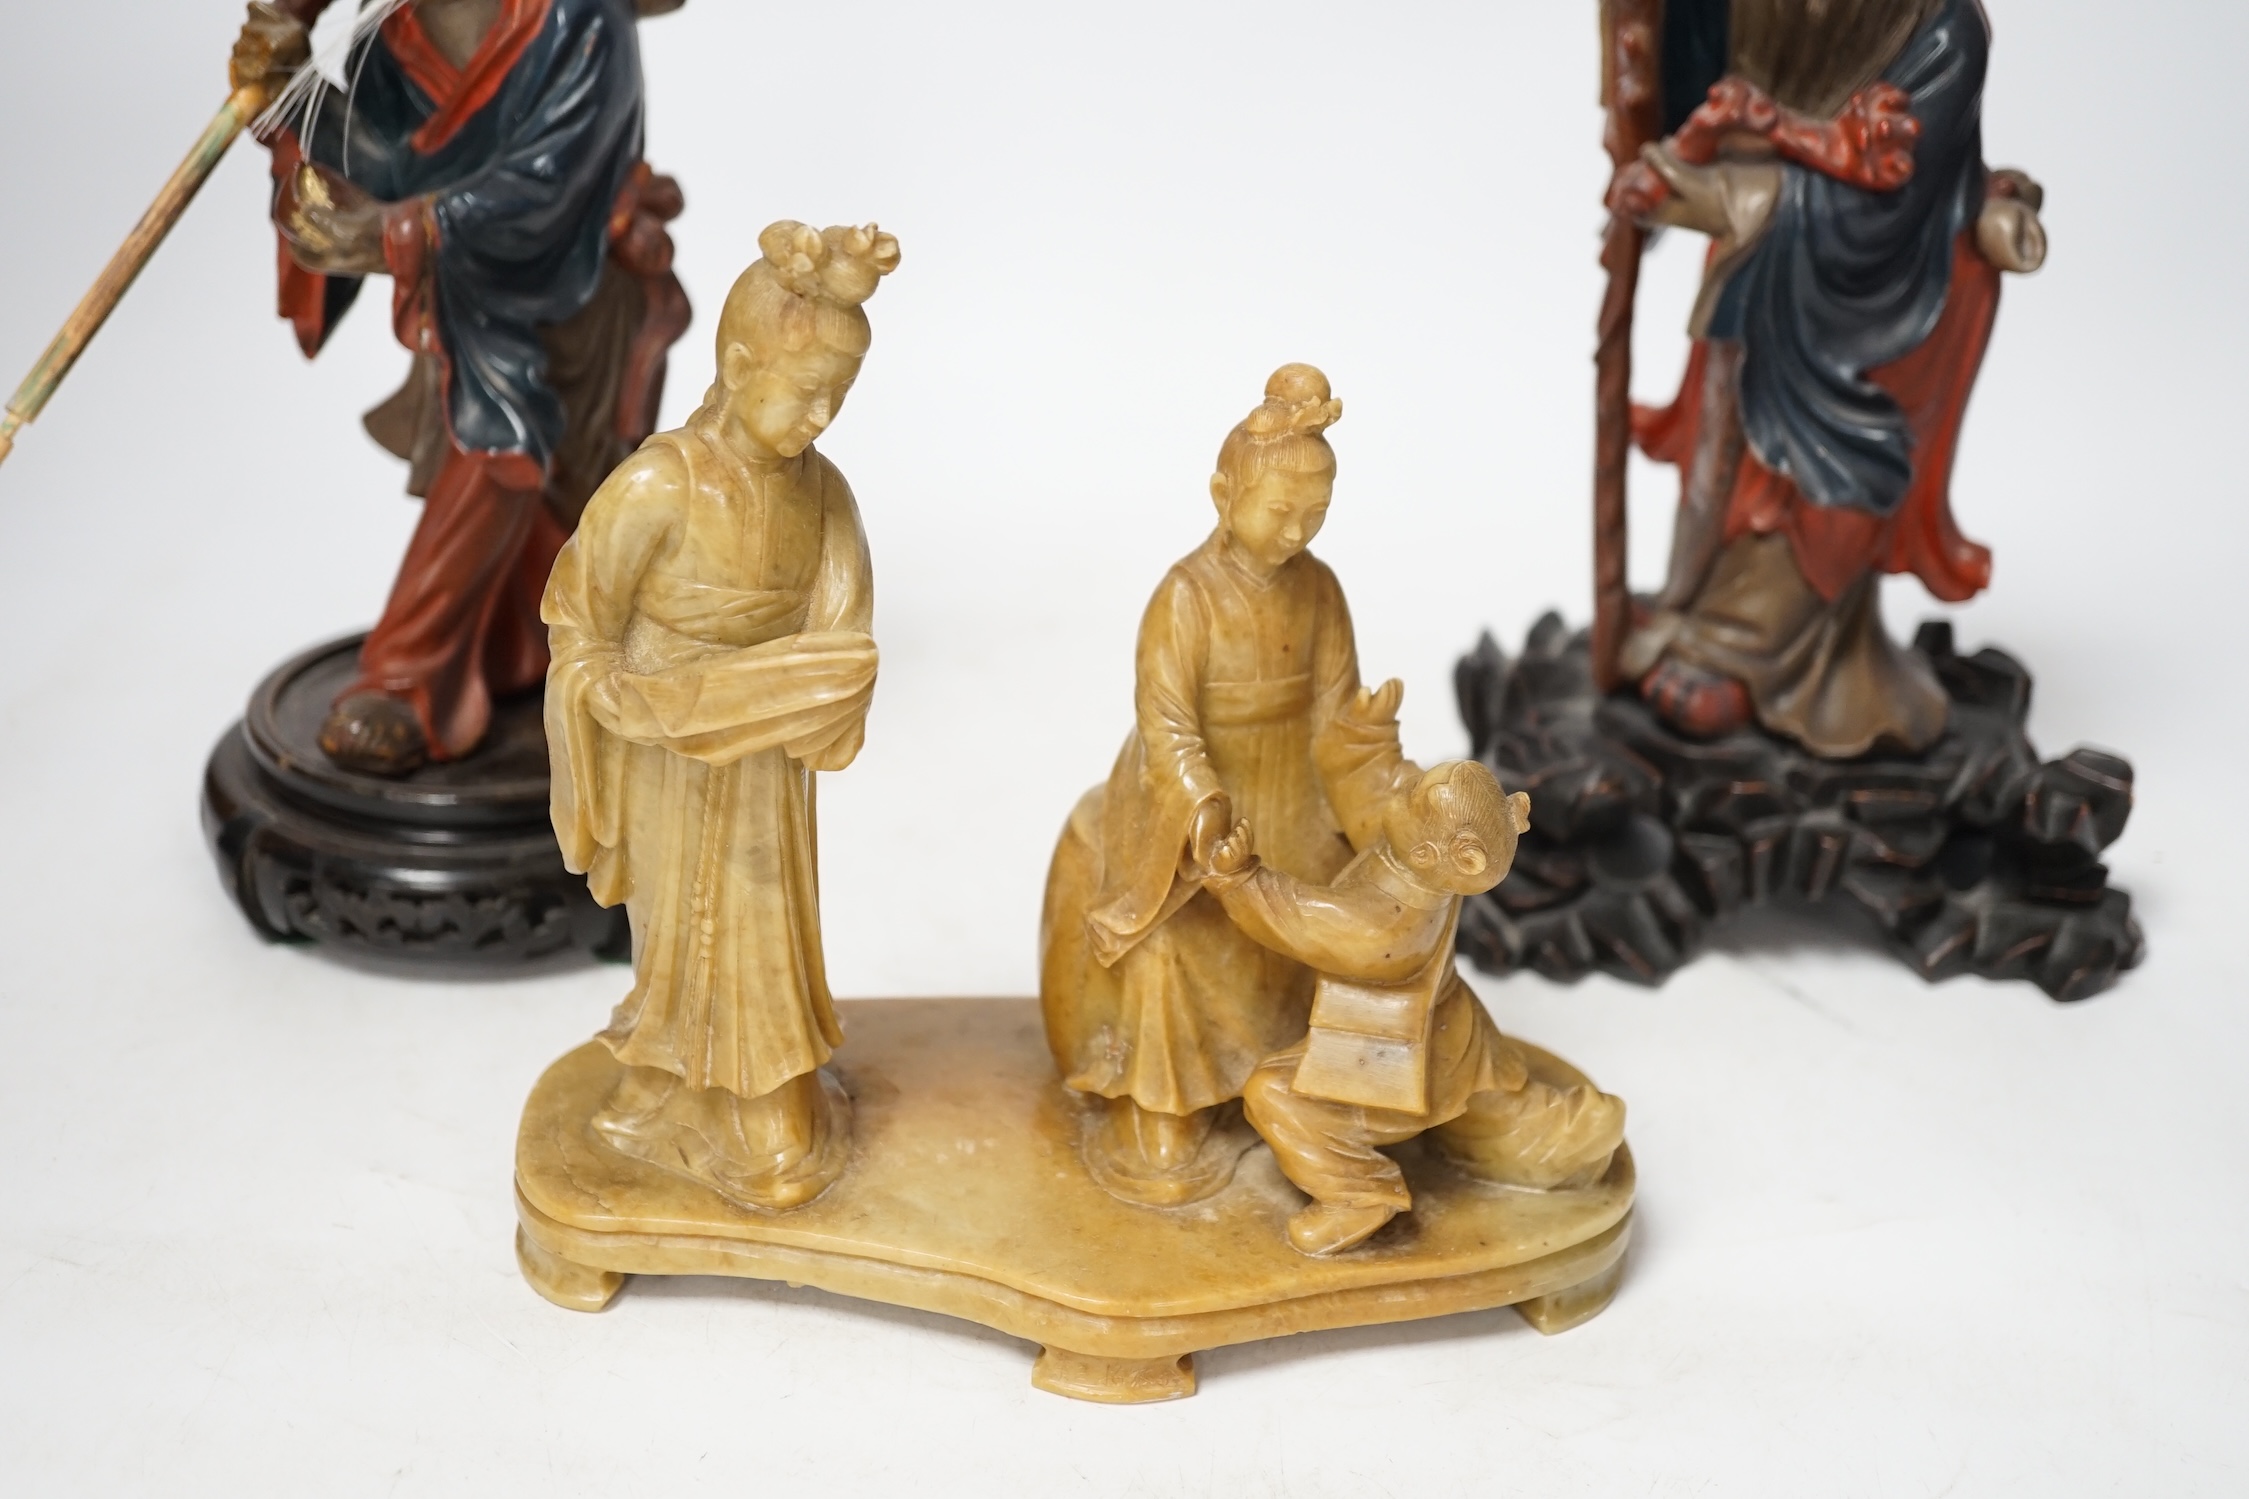 Two Chinese Fuzhou lacquer figures of Shou Lao and a smaller soapstone figure group, tallest Fuzhou figure 25cm high (3). Condition - some wear but fair